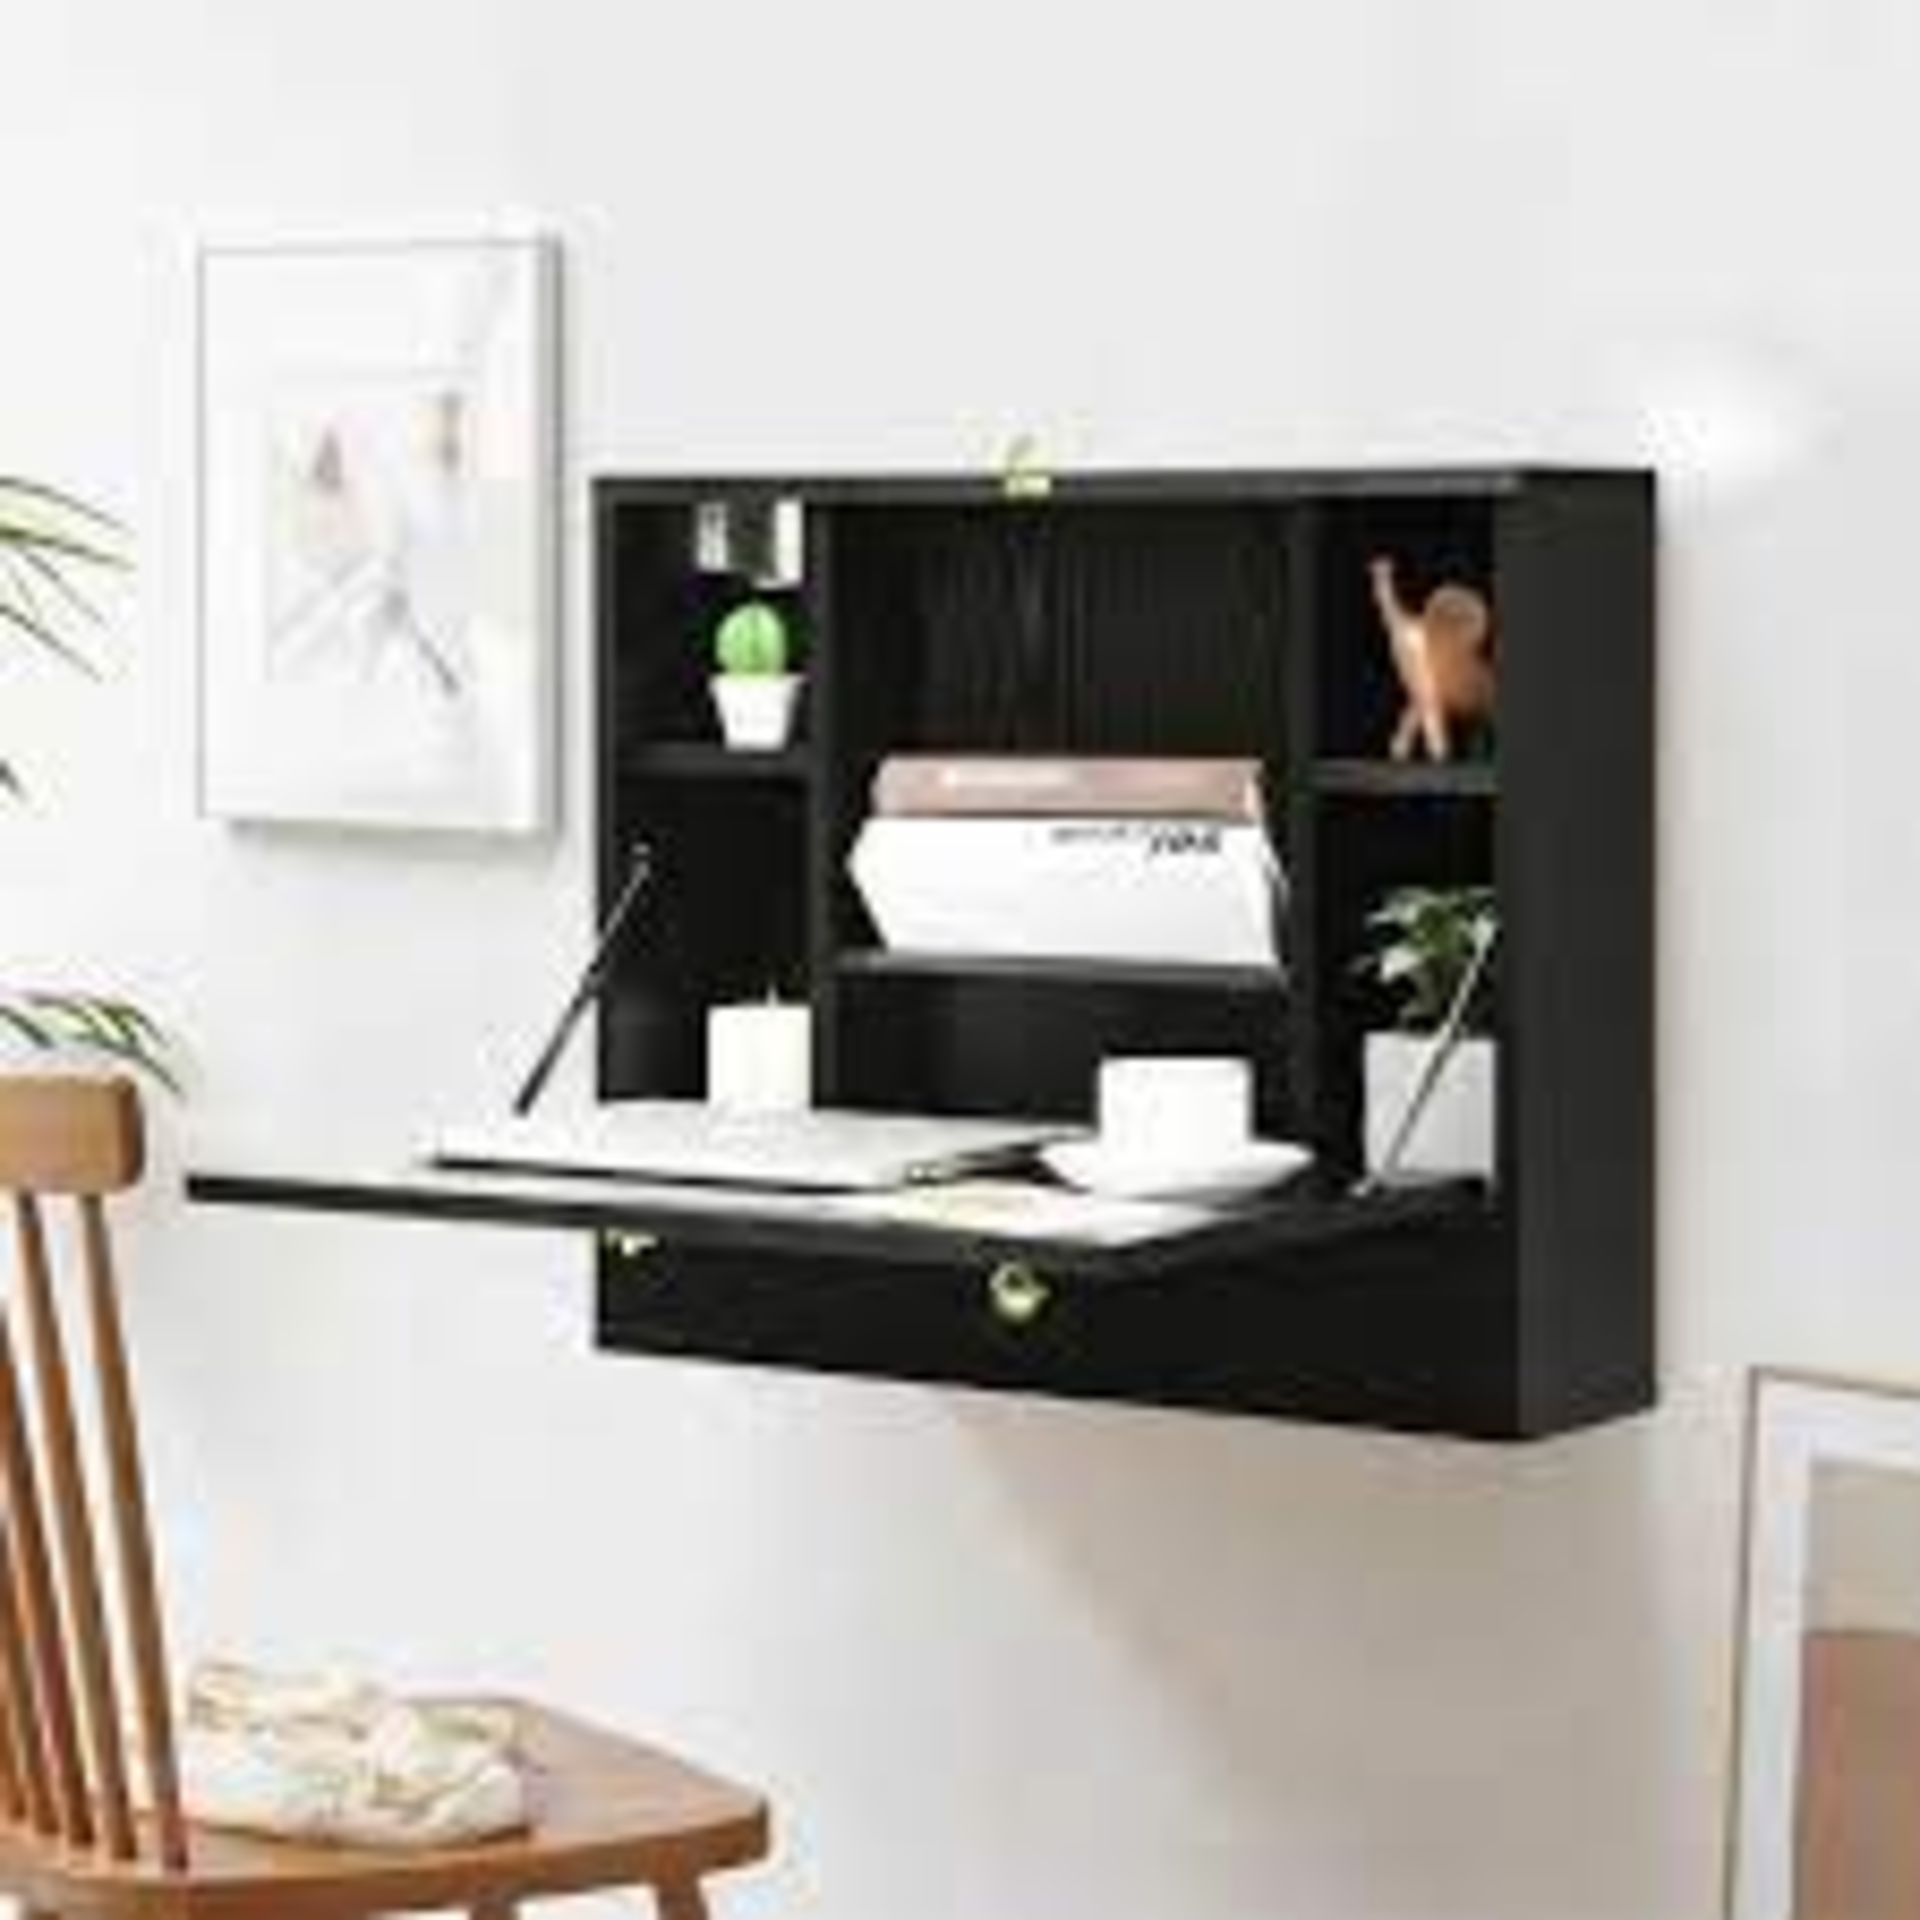 Wall Mounted Wooden Cabinet with Drop Down Desk-Black - ER53